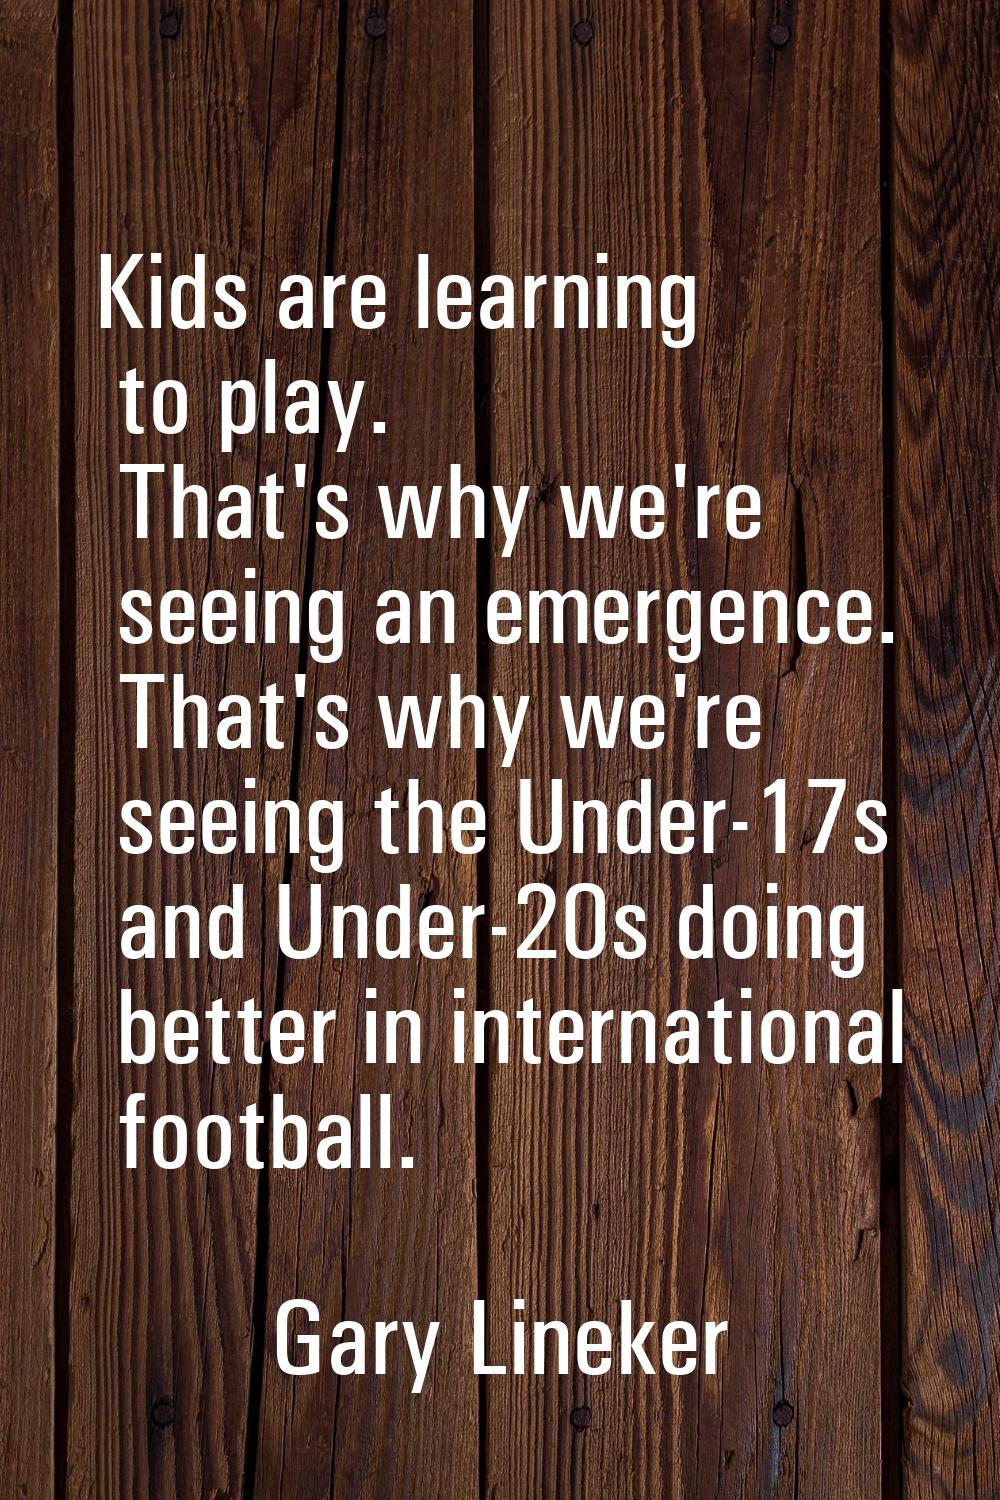 Kids are learning to play. That's why we're seeing an emergence. That's why we're seeing the Under-